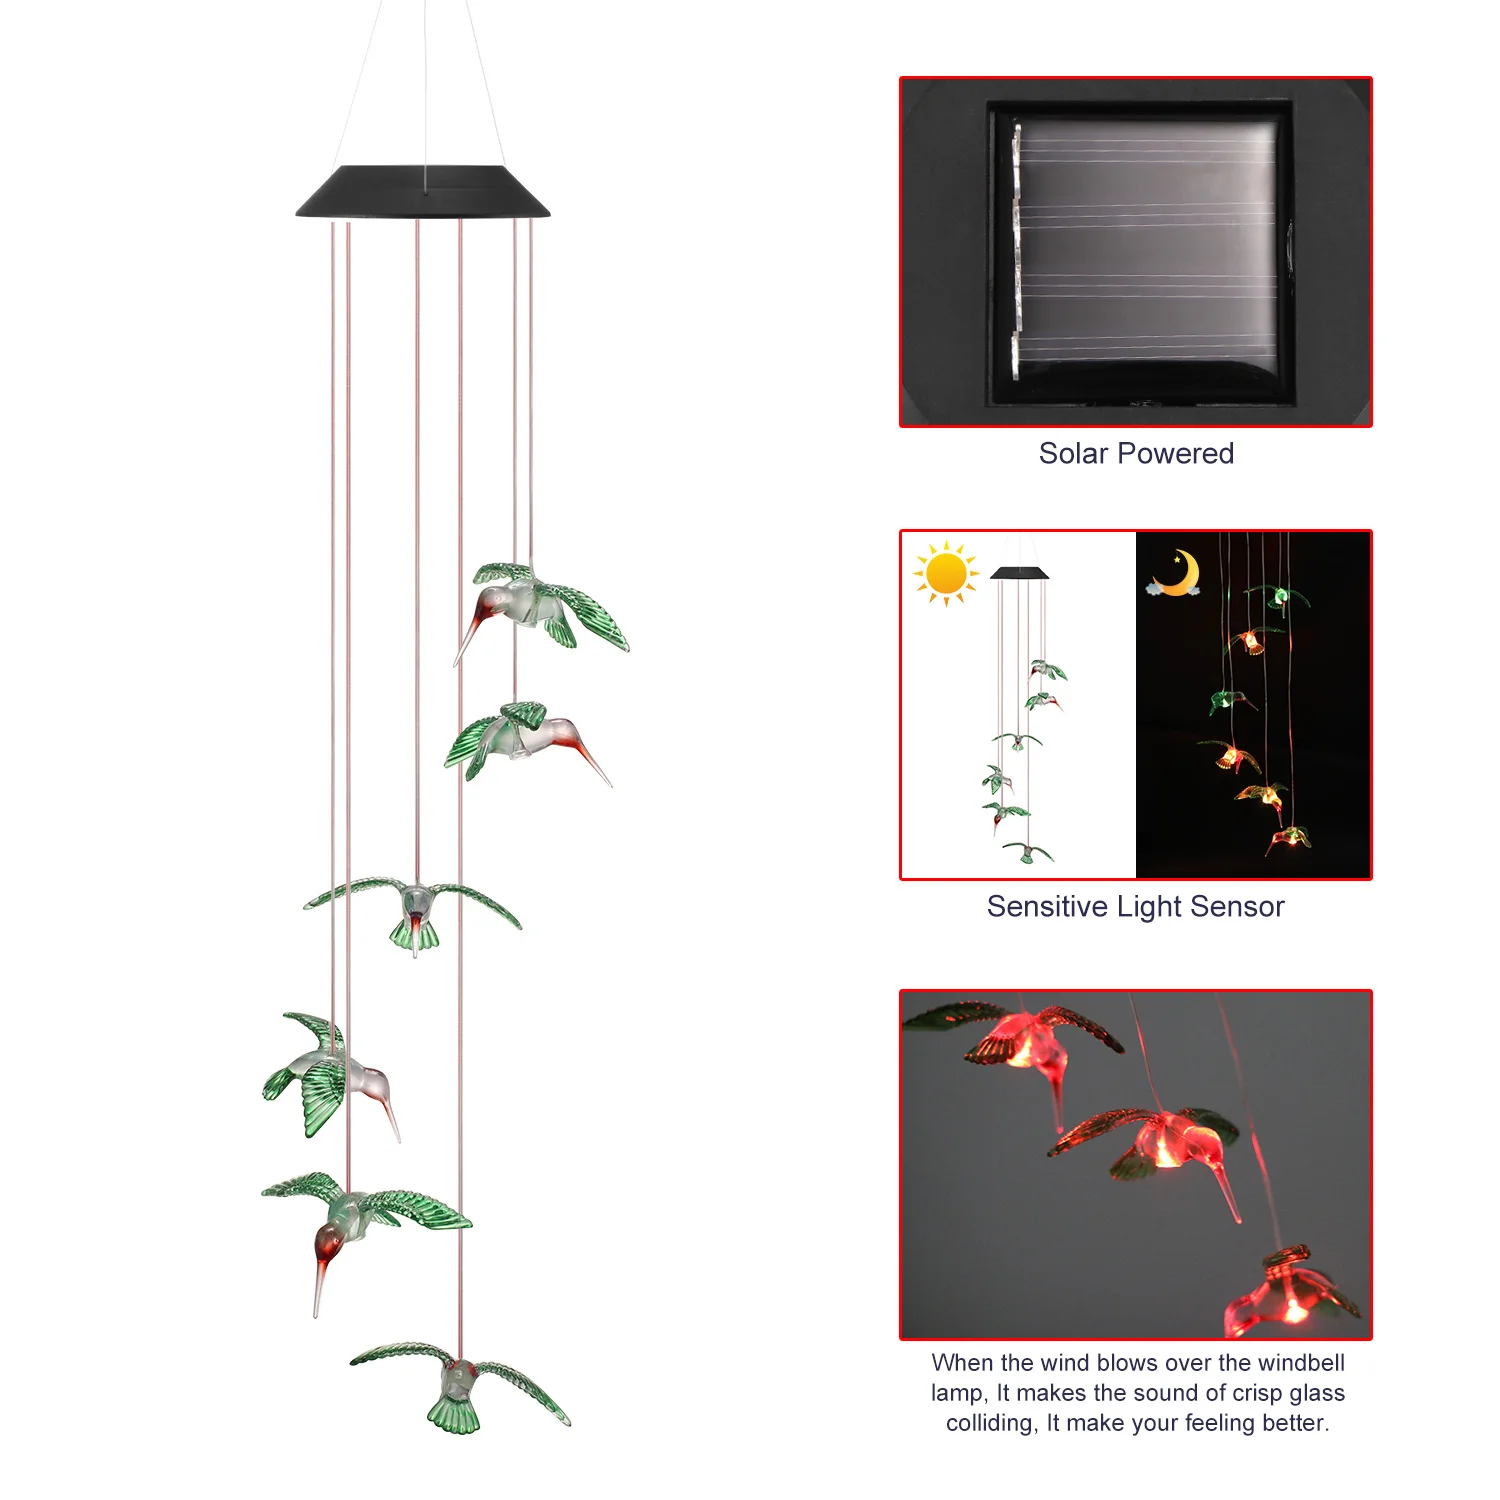 

Outdoor Solar Light 6 LED Hummingbird Wind Chime Butterfly Color Changing LED Hanging Garden Lamp Patio Porch Deck Balcony Decor